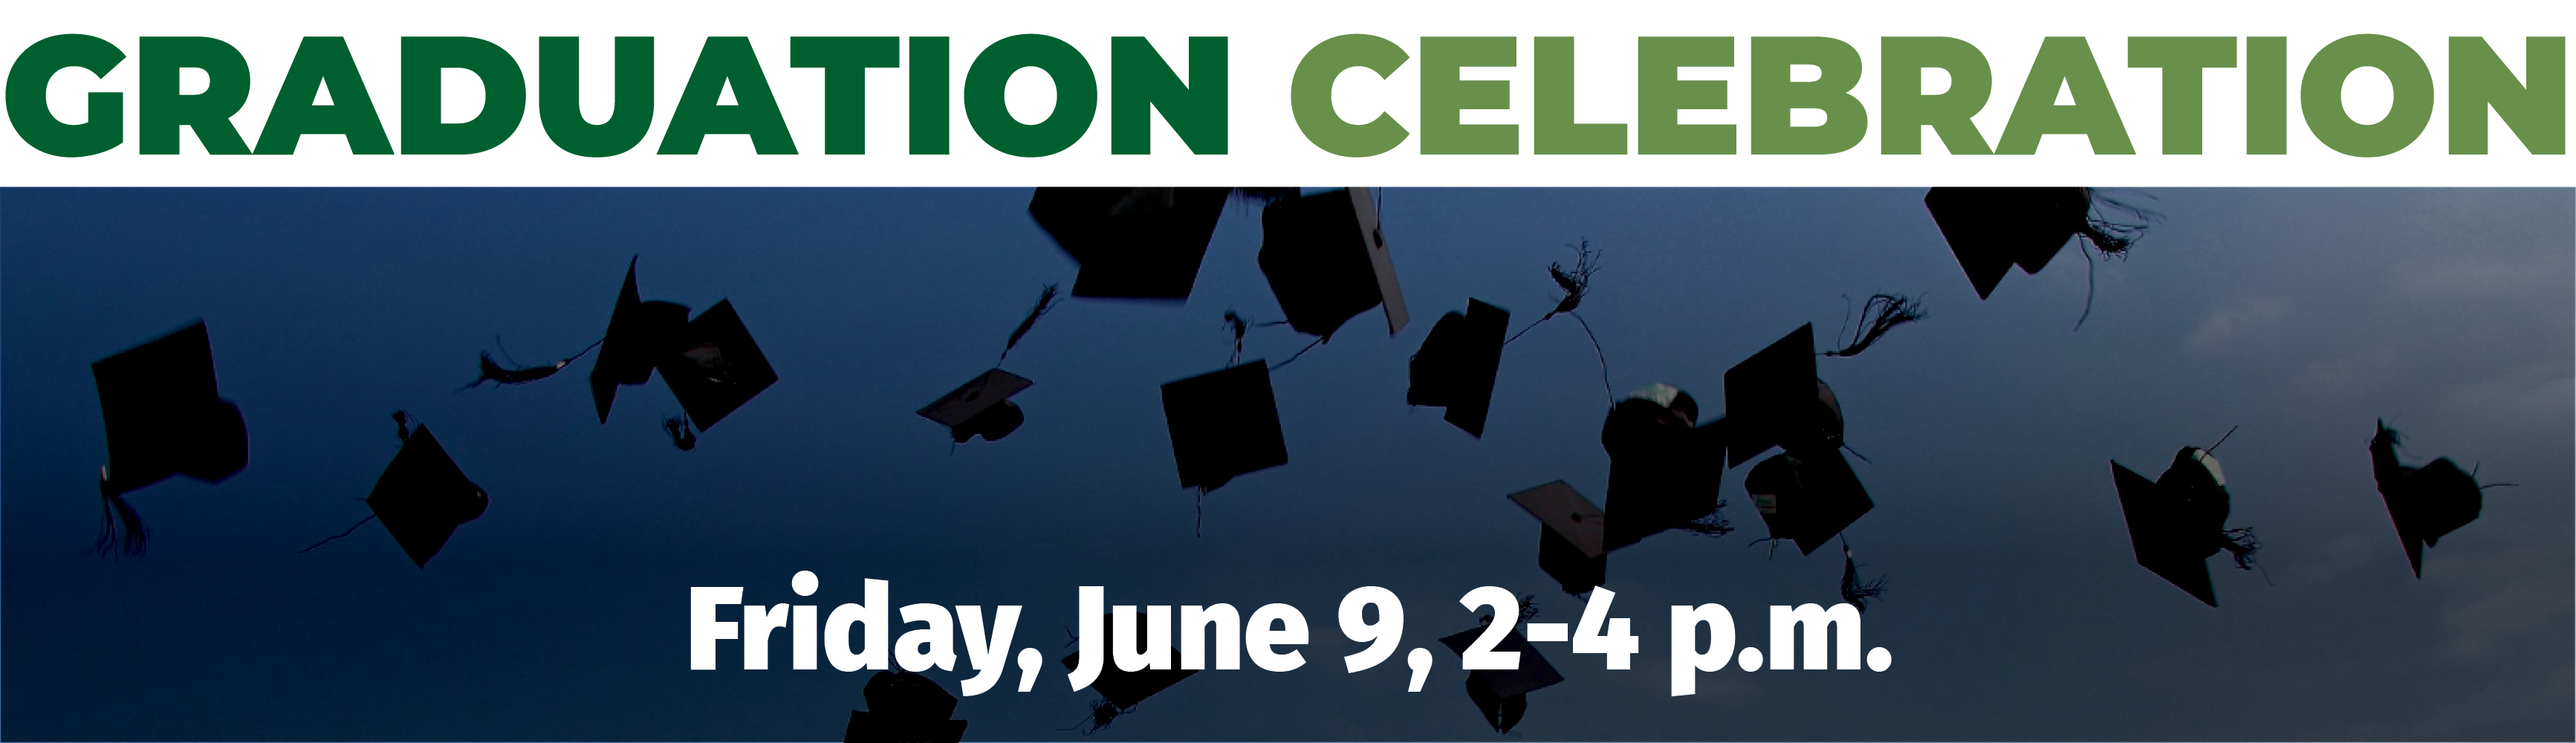 A background image of graduation caps being tossed in the air. Text overlaid reads "Graduation Celebration. Friday, June 9, 2-4 p.m."